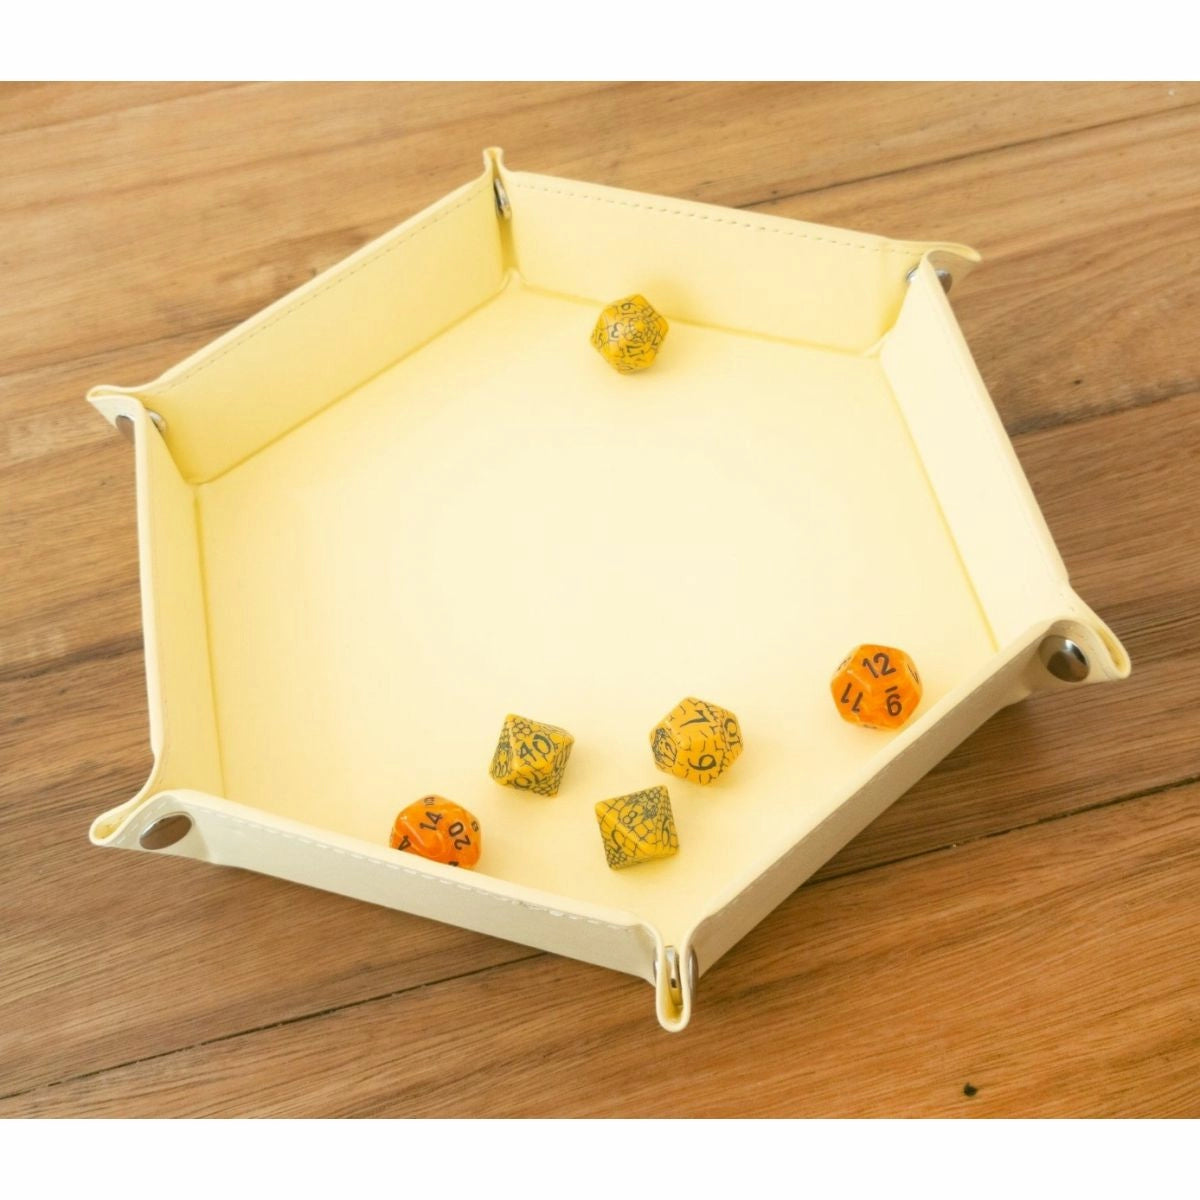 HEX 8 INCH DICE TRAY - YELLOW